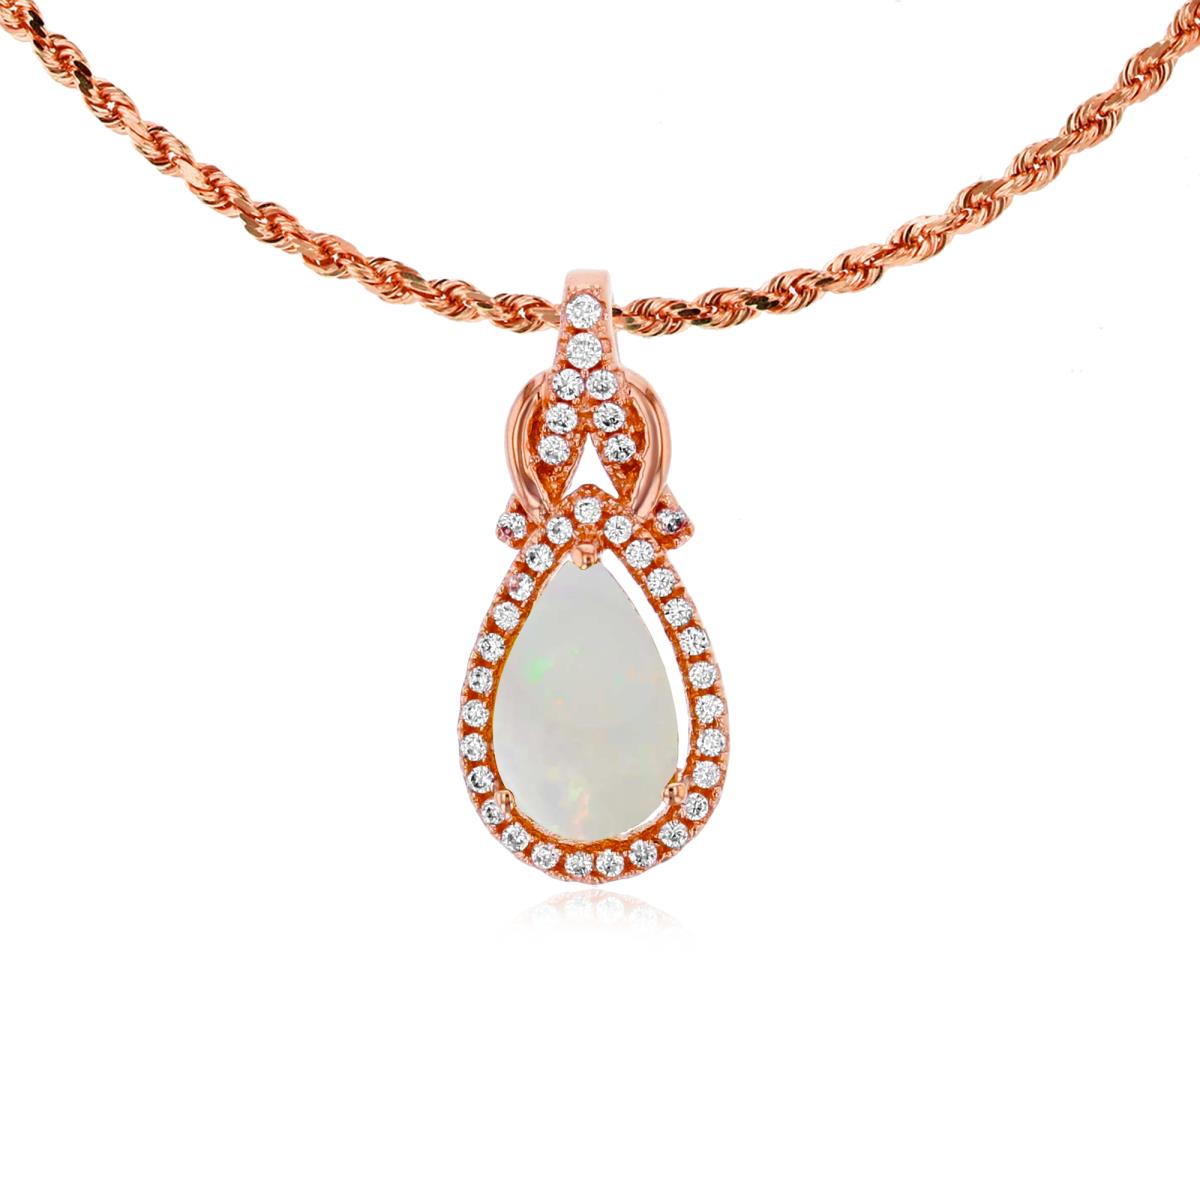 10K Rose Gold 8x5mm Pear Cut Opal & 0.11 CTTW Rnd Diamond Knot 18" Rope Chain Necklace